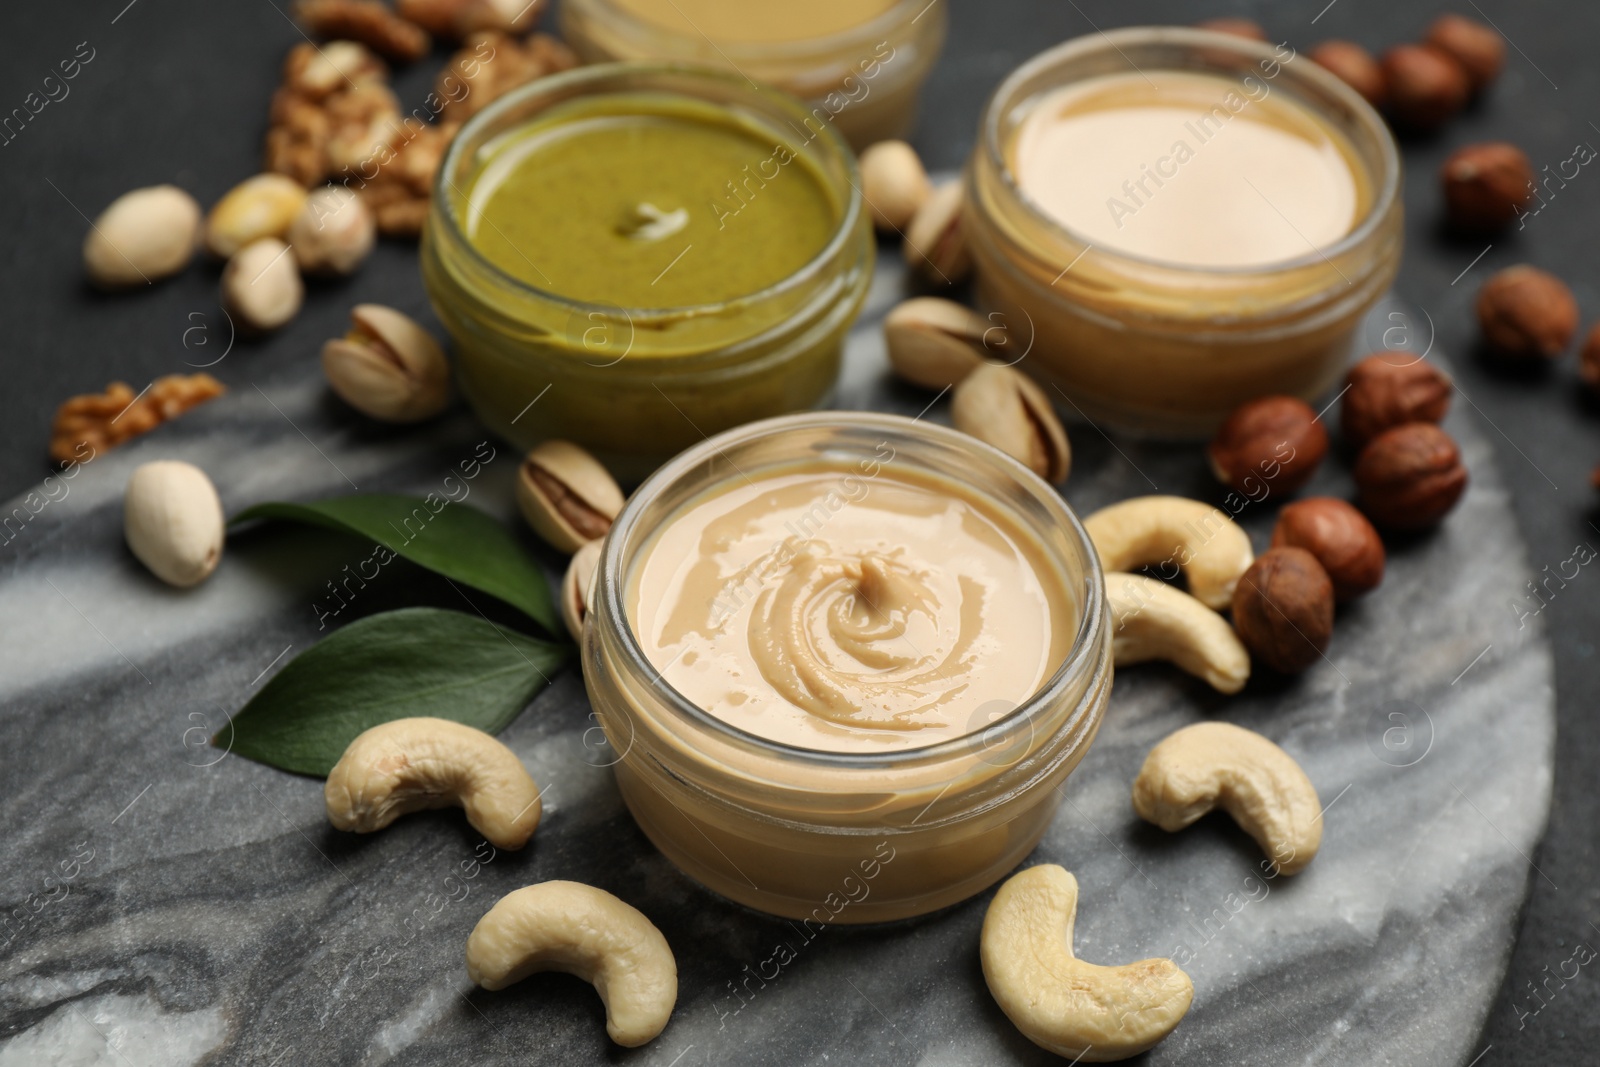 Photo of Jars with butters made of different nuts and ingredients on black table, closeup